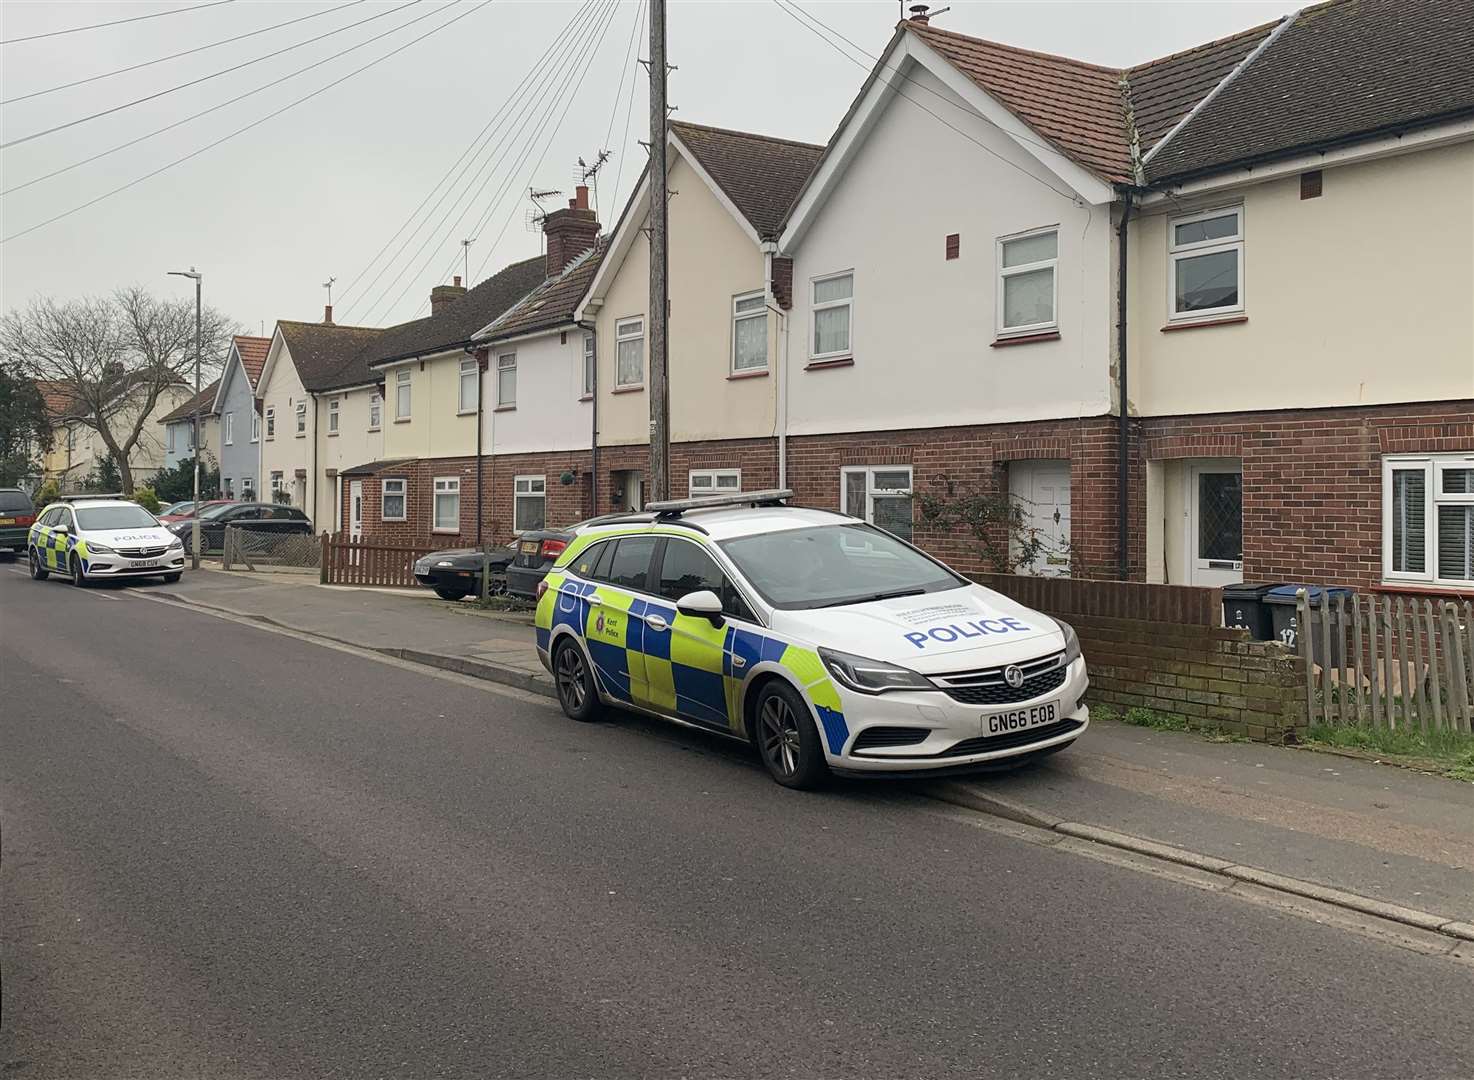 Police were at the scene in Mill Road, Deal and forensics investigators were reported to have attended